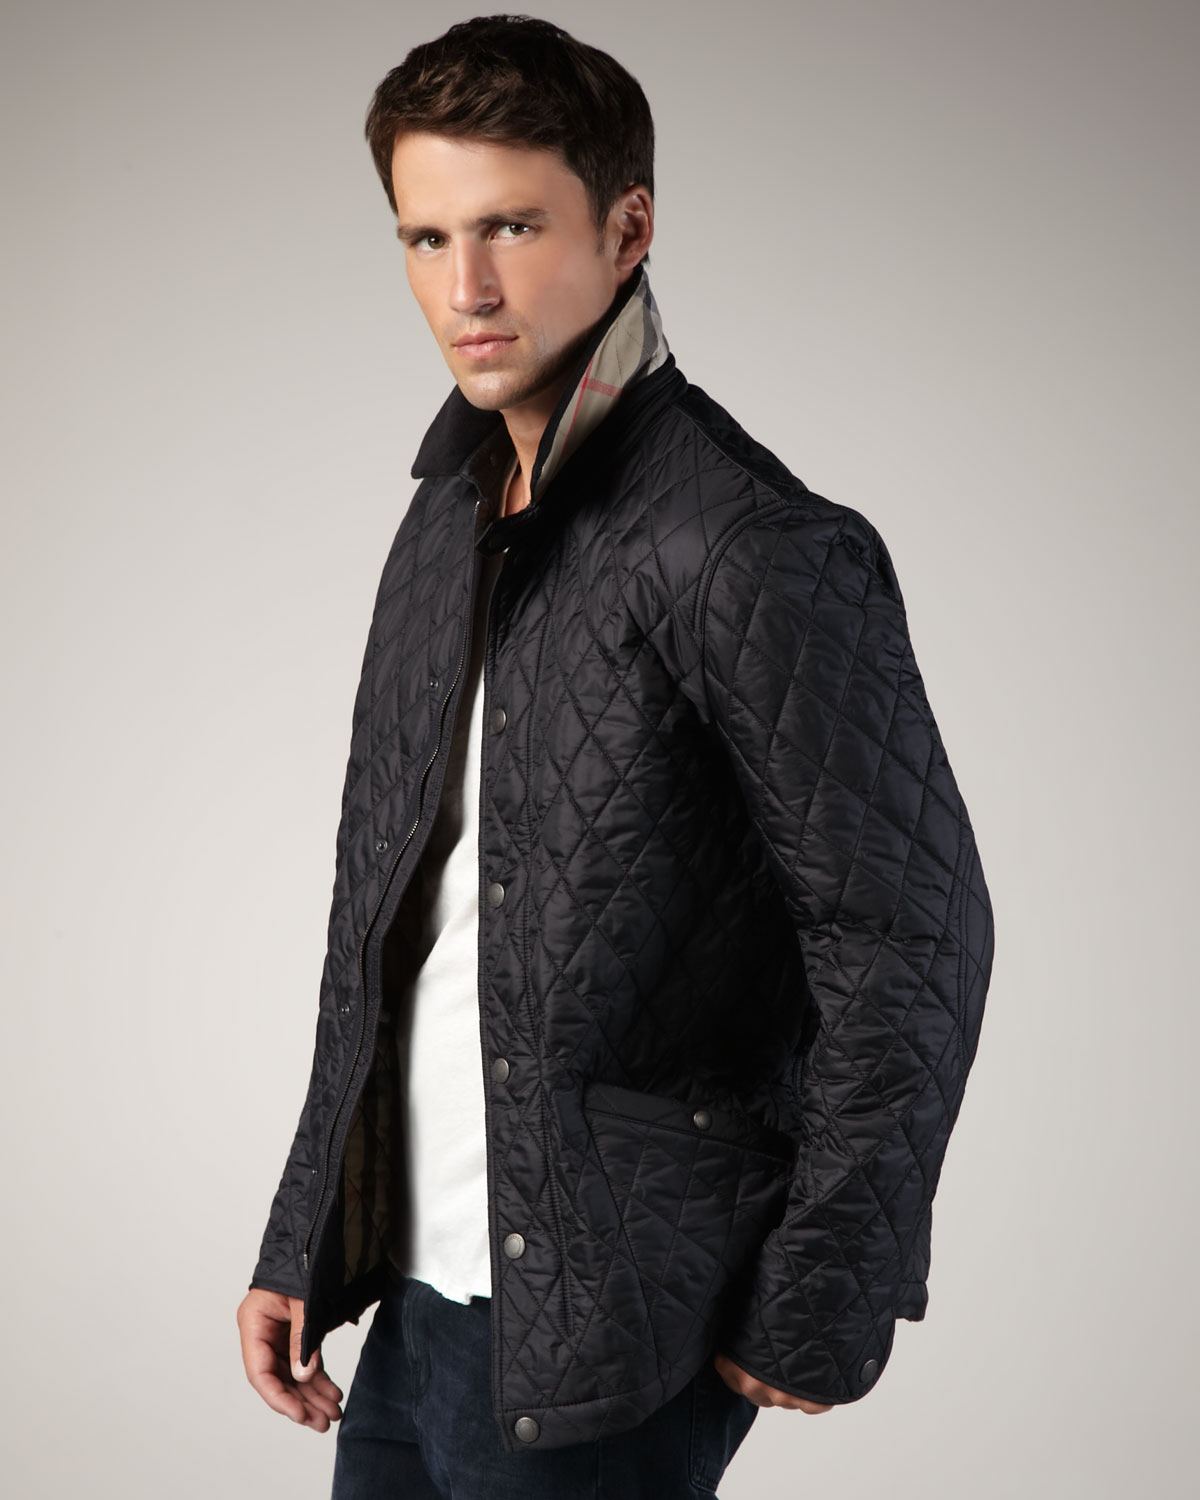 burberry jacket sale mens Cheaper Than Retail Price> Buy Clothing,  Accessories and lifestyle products for women & men -